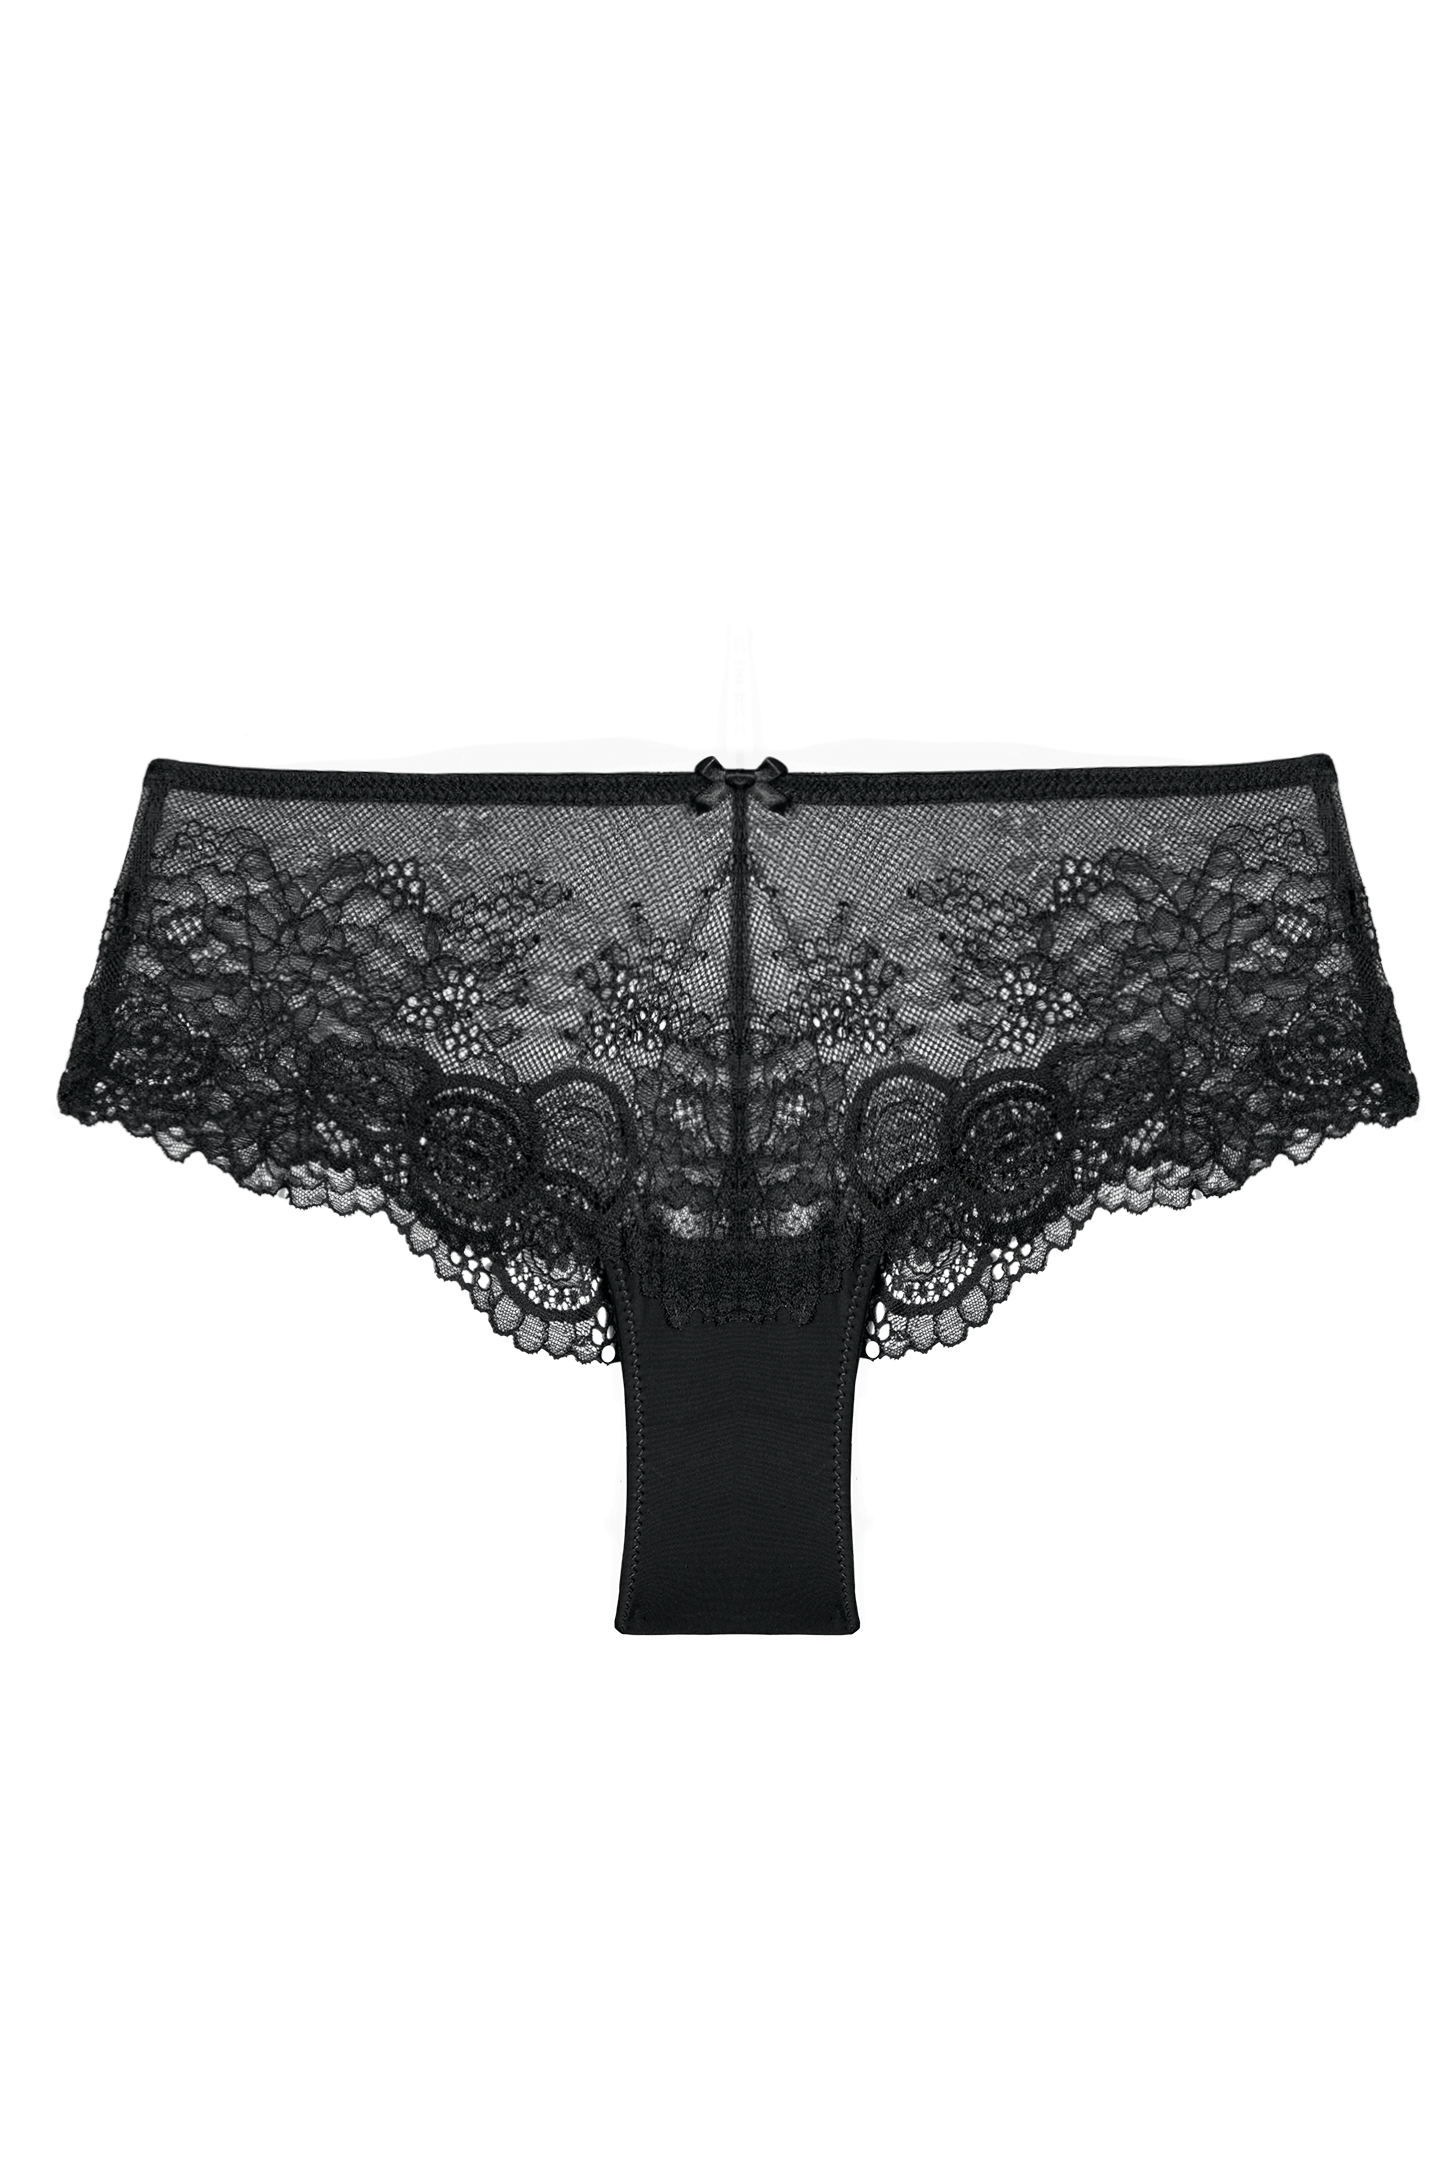 Buy AMOUR CHEEKY BRIEF online at Intimo